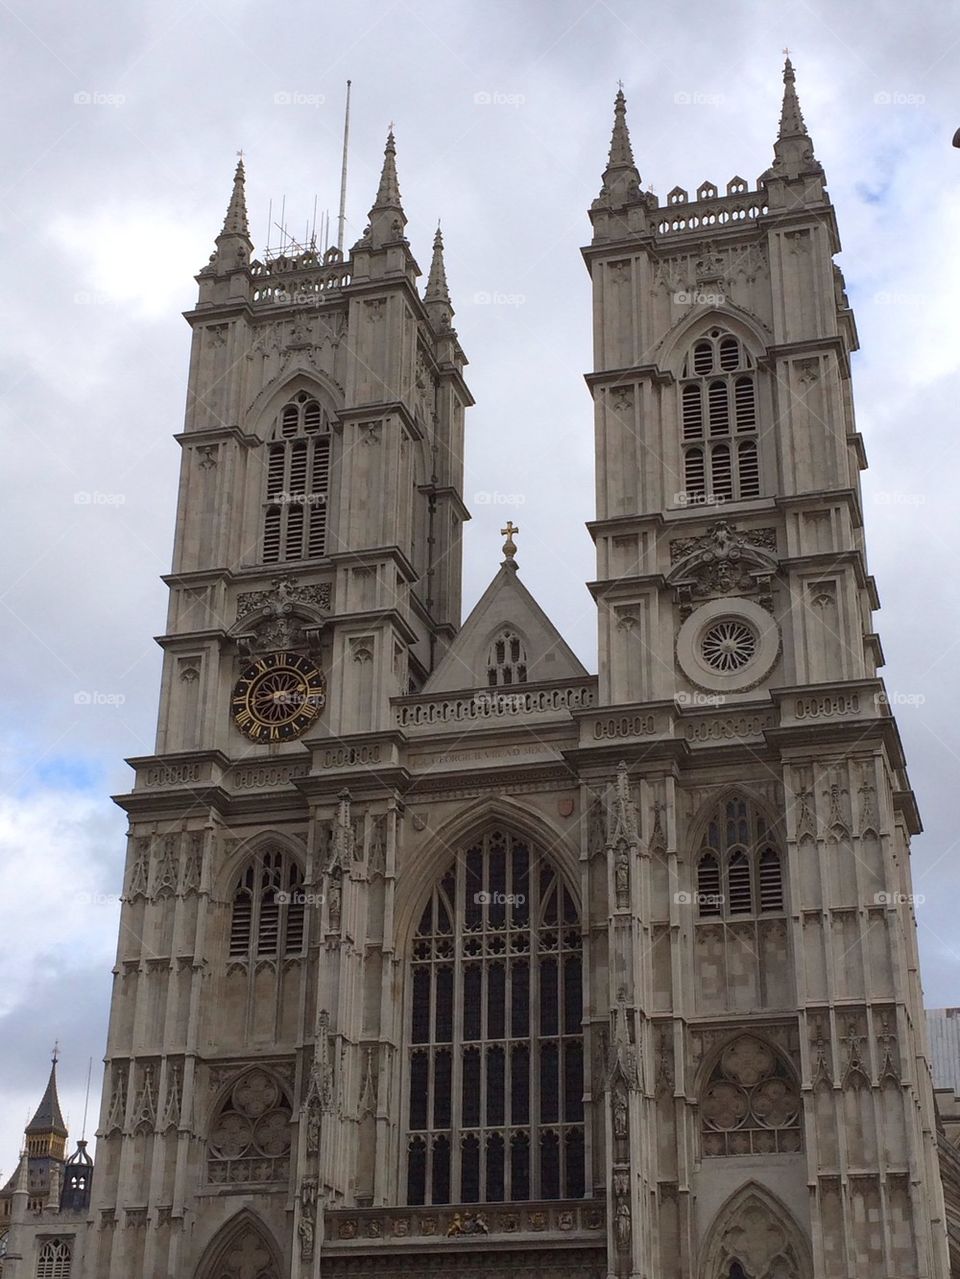 West Minster Abbey